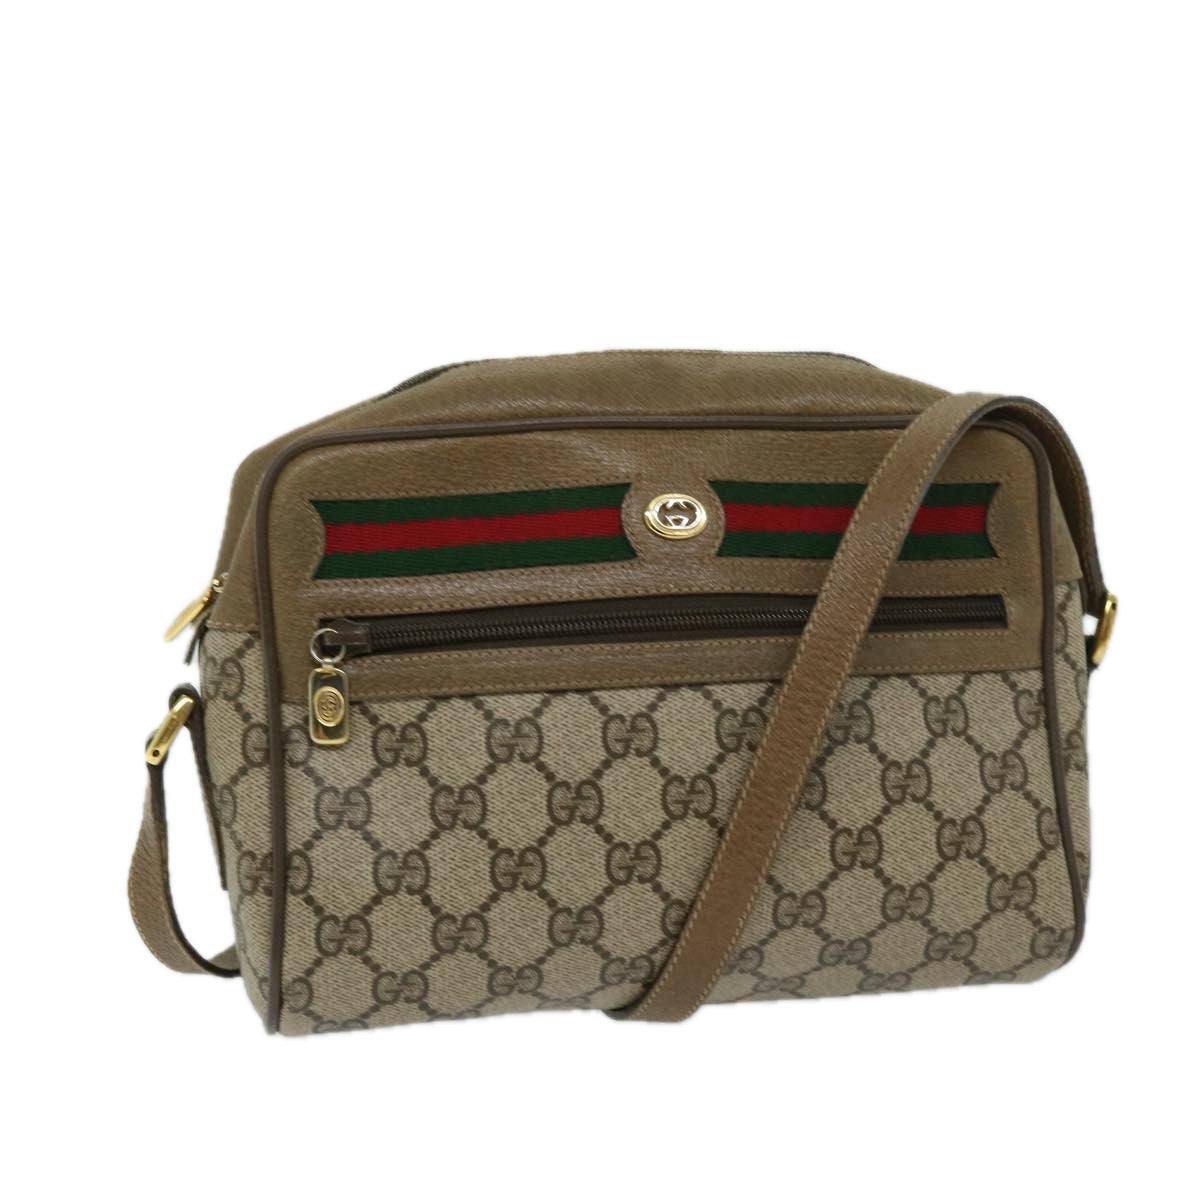 GUCCI GG Supreme Web Sherry Line Shoulder Bag Beige Red 56 02 087 Auth th4696